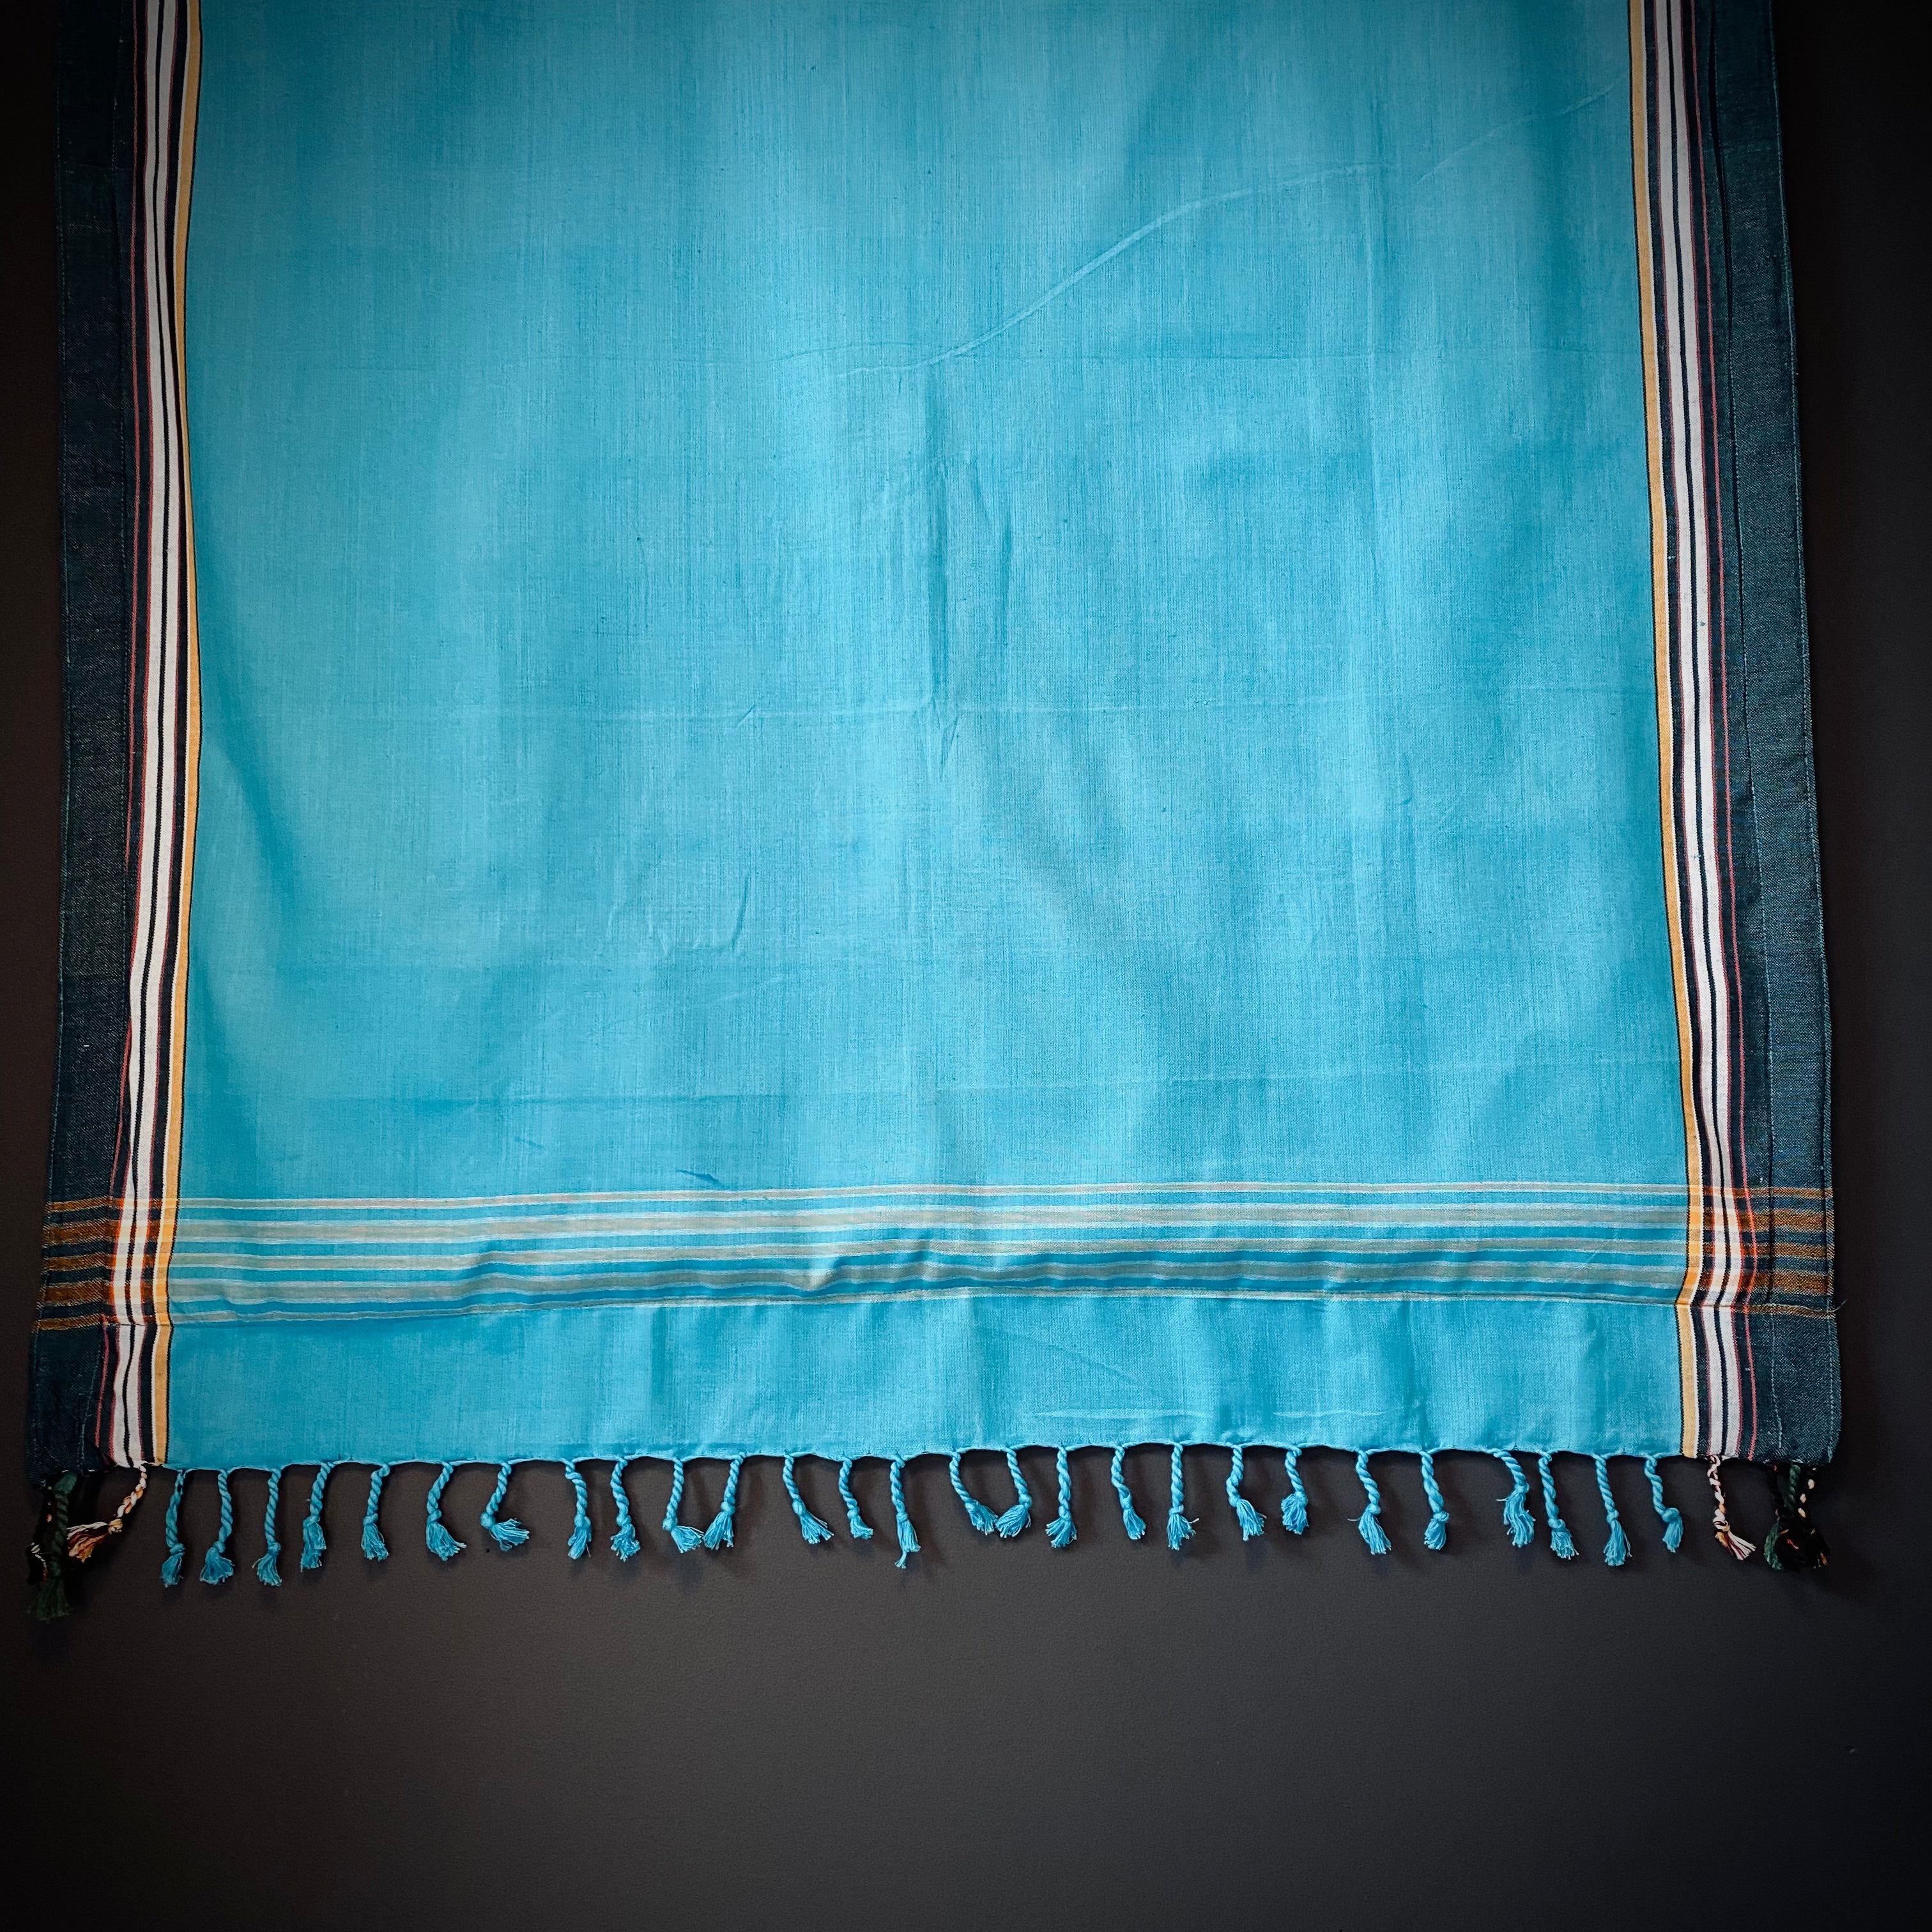 Kikoi Strandtuch one color turquoise with dark frame and light blue towel